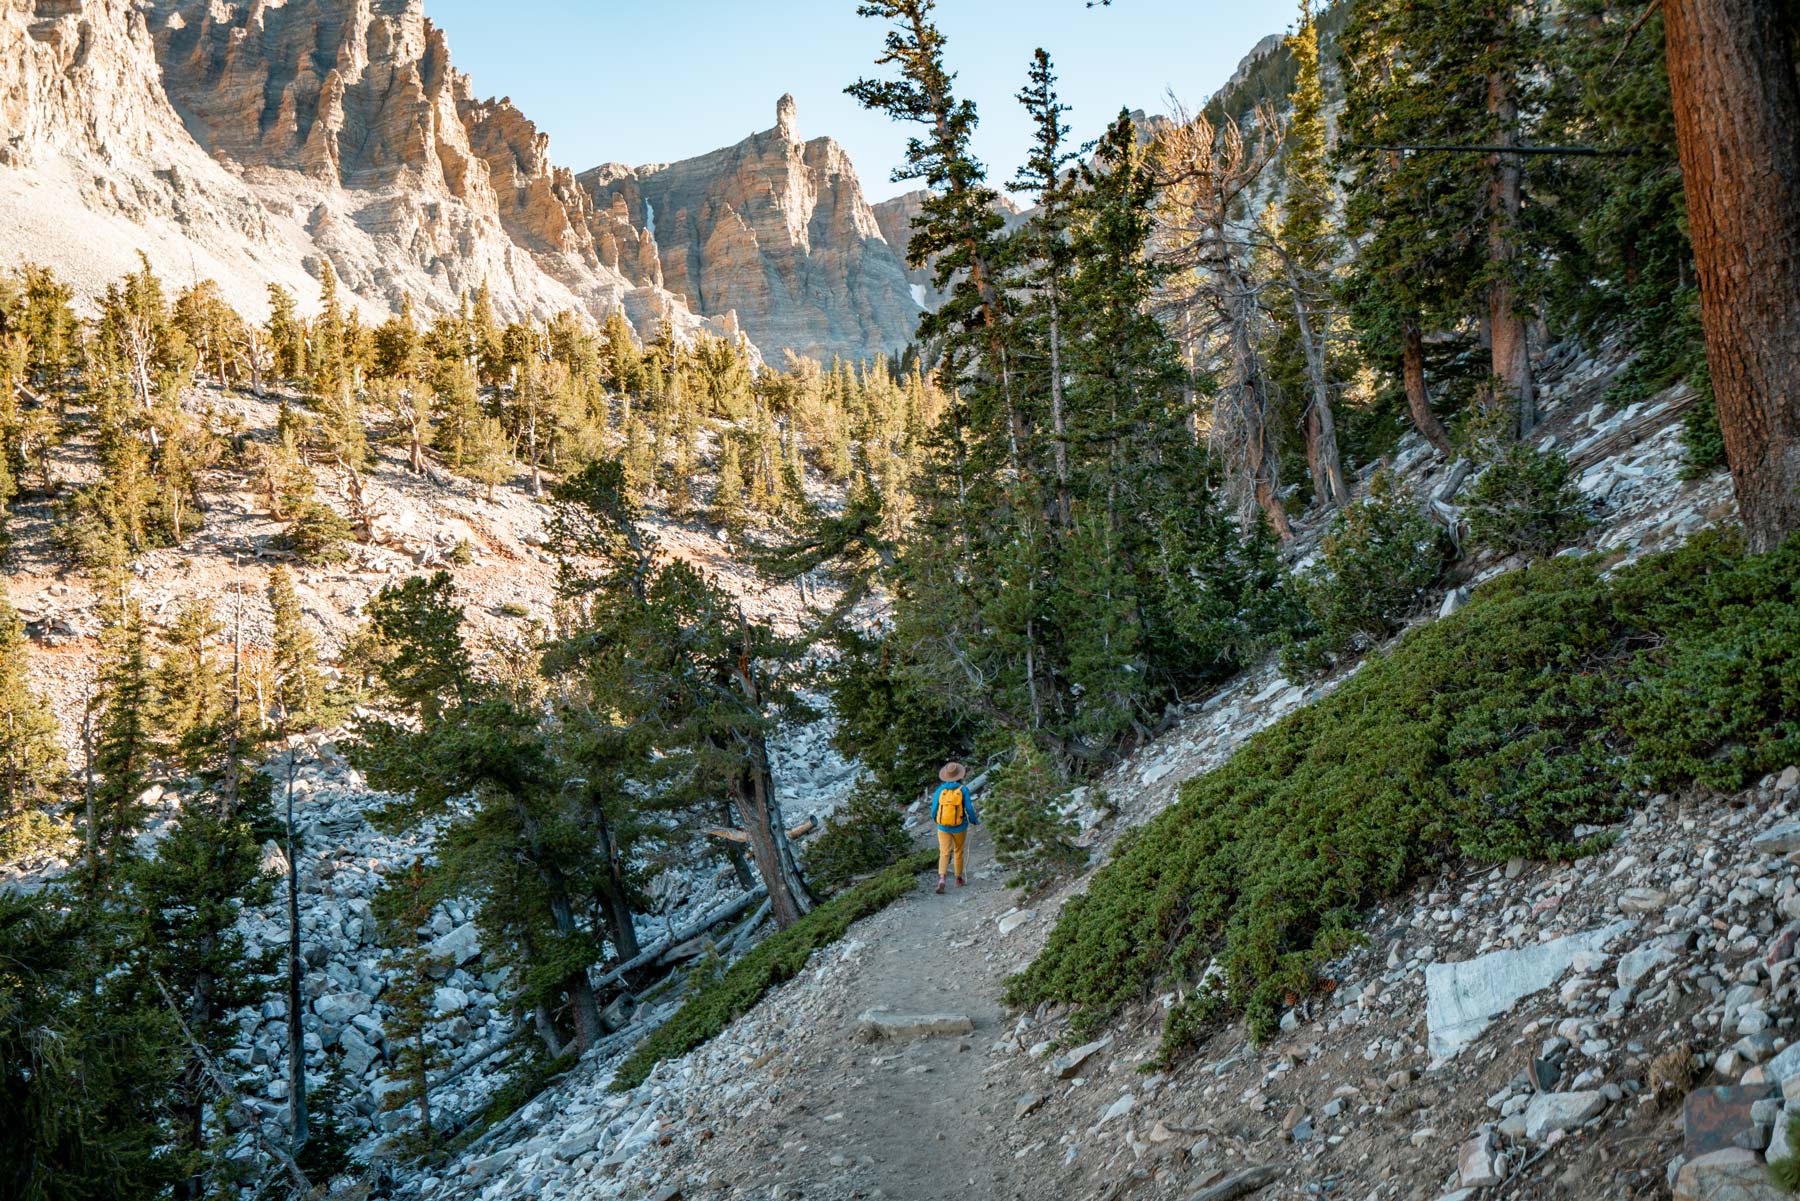 things to do in great basin national park nevada, least visited national parks